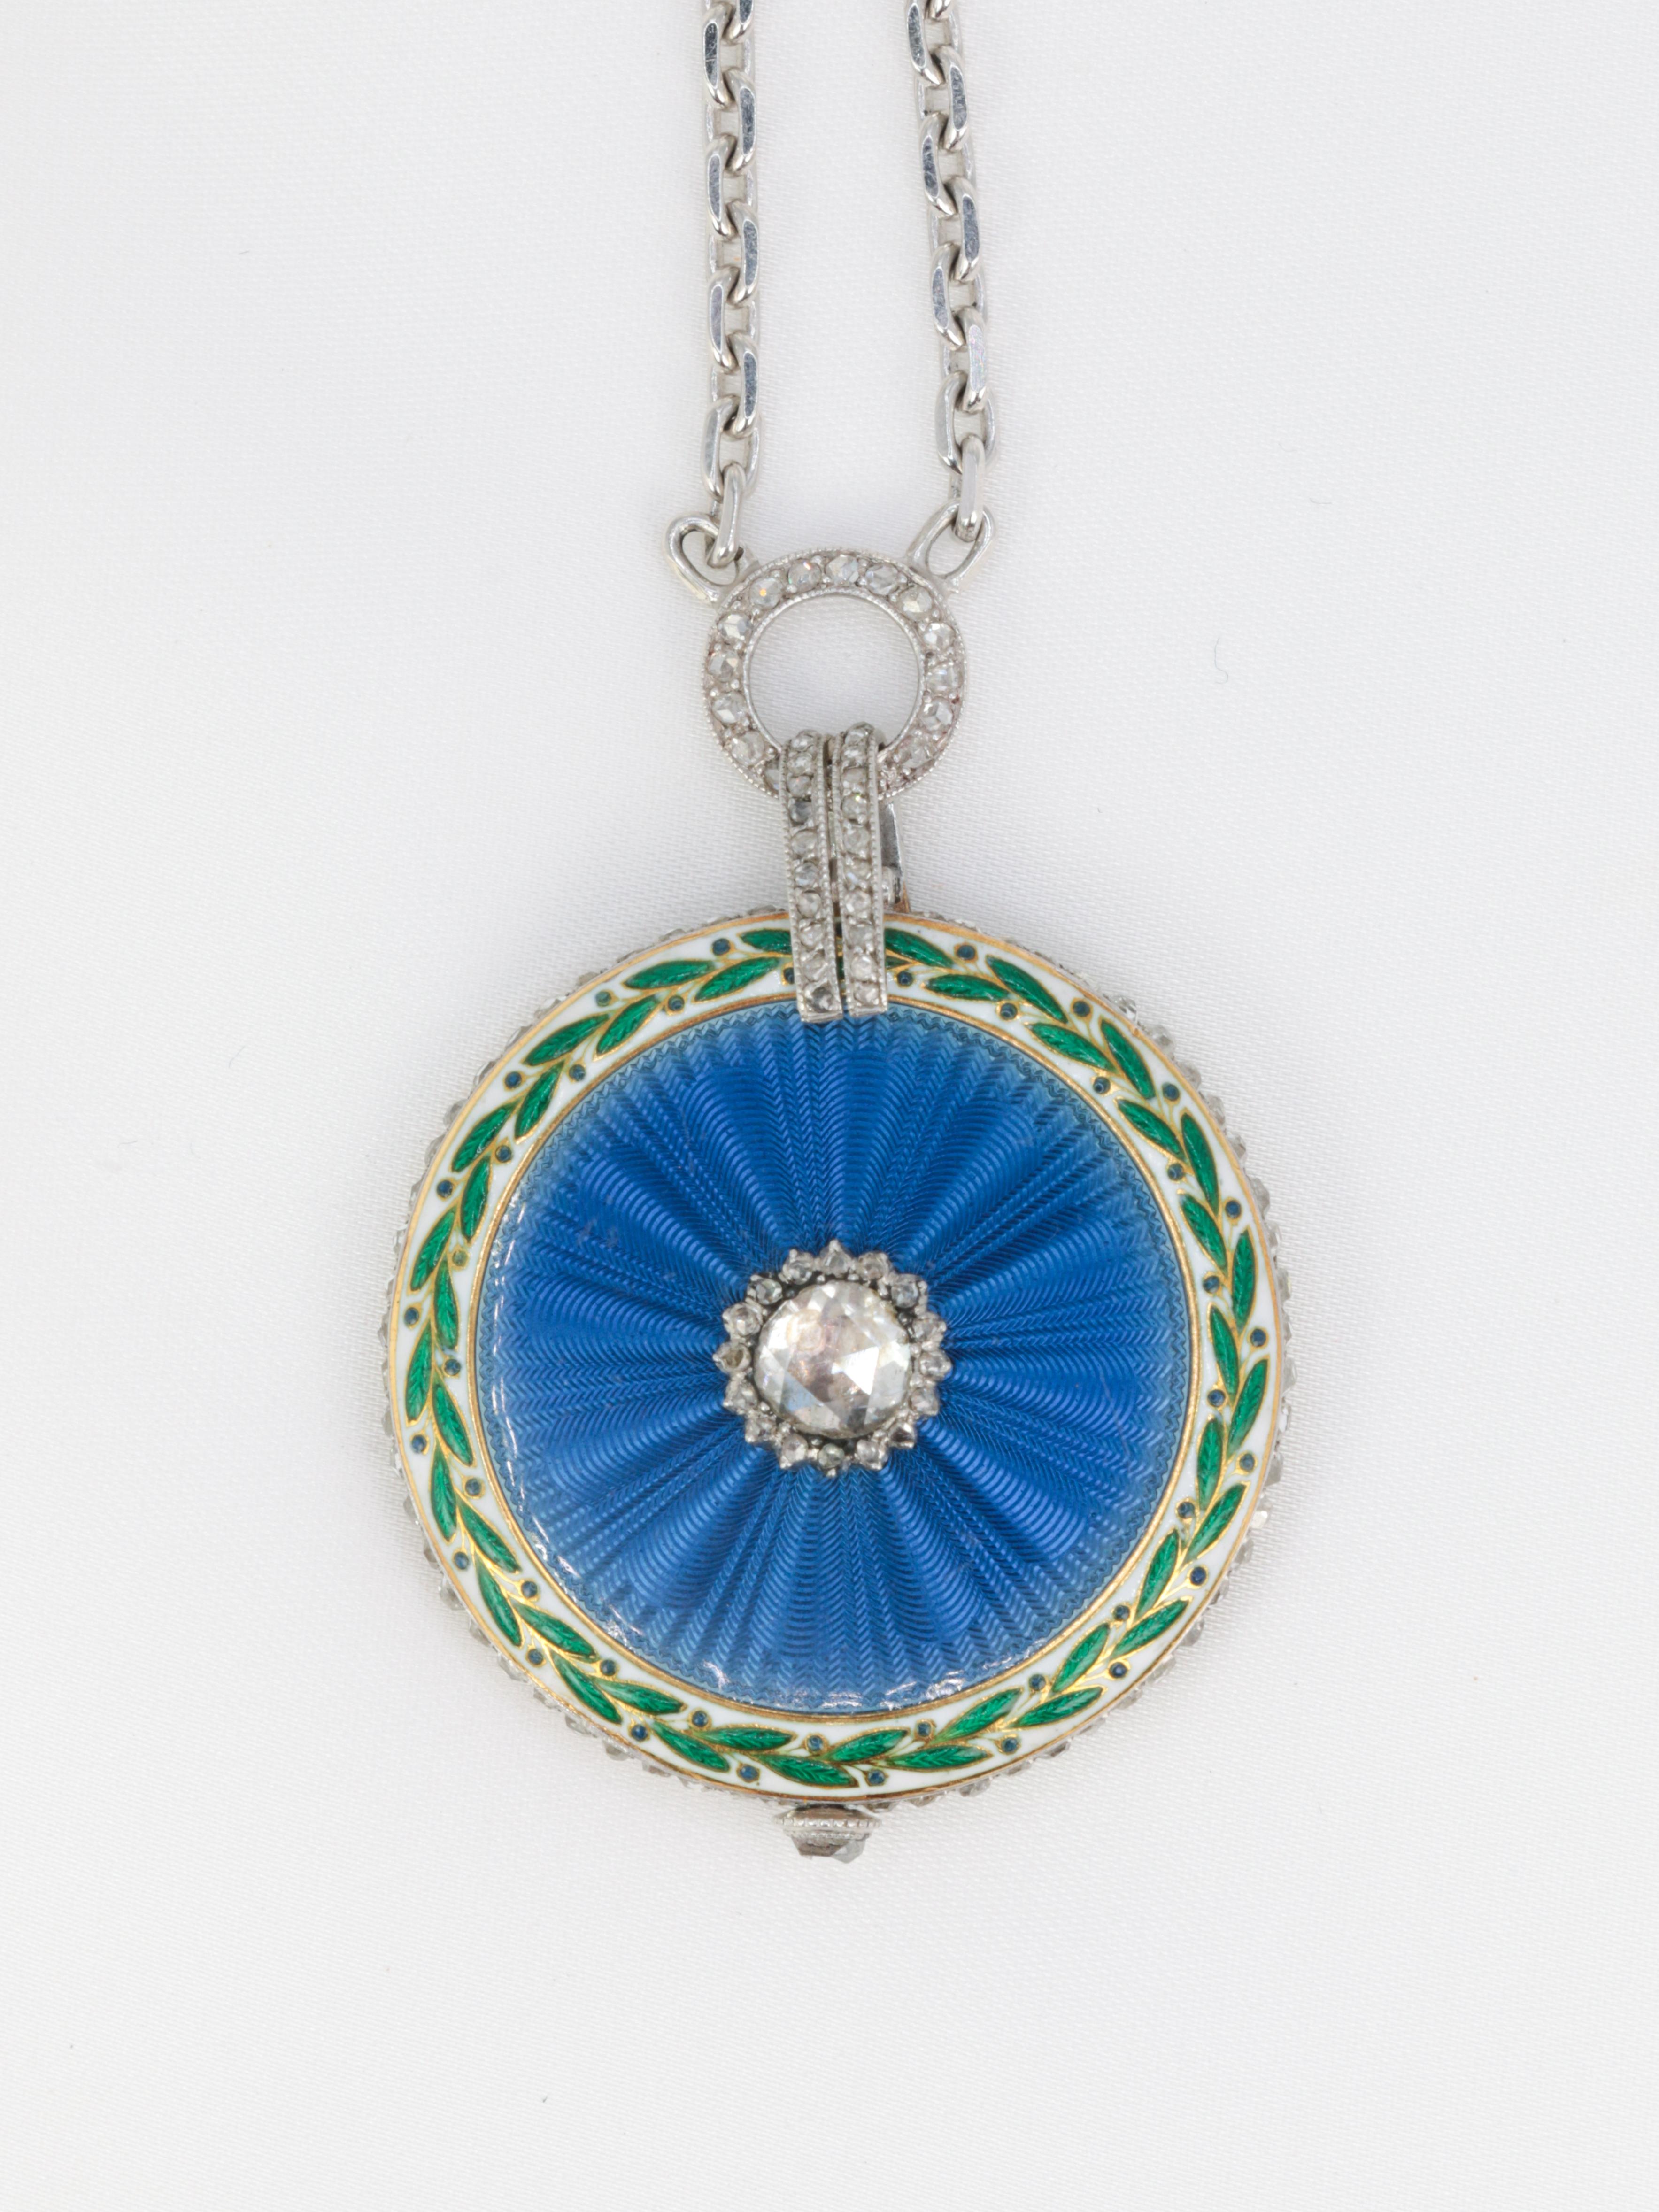 CARTIER 
18Kt (750°/°°) gold Collar watch/Pendant in 18k set with diamonds and enamel. The back of the watch is decorated with blue guilloché enamel and circled with white and green enamel figuring a floral motif. In the center, the watch is set